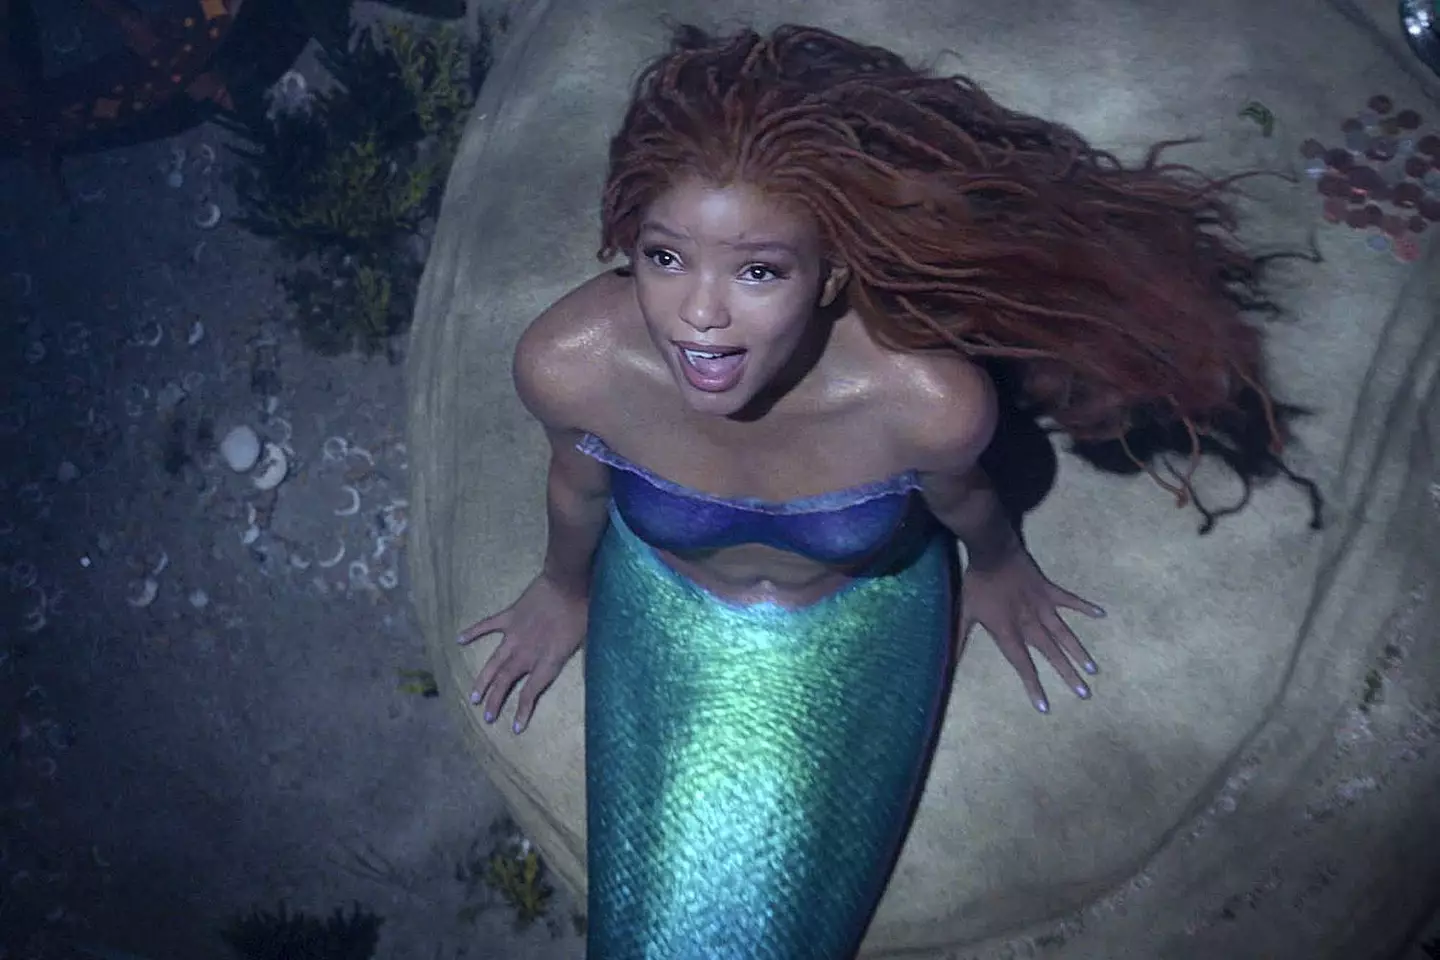 Bailey will be the first ever Black Ariel.